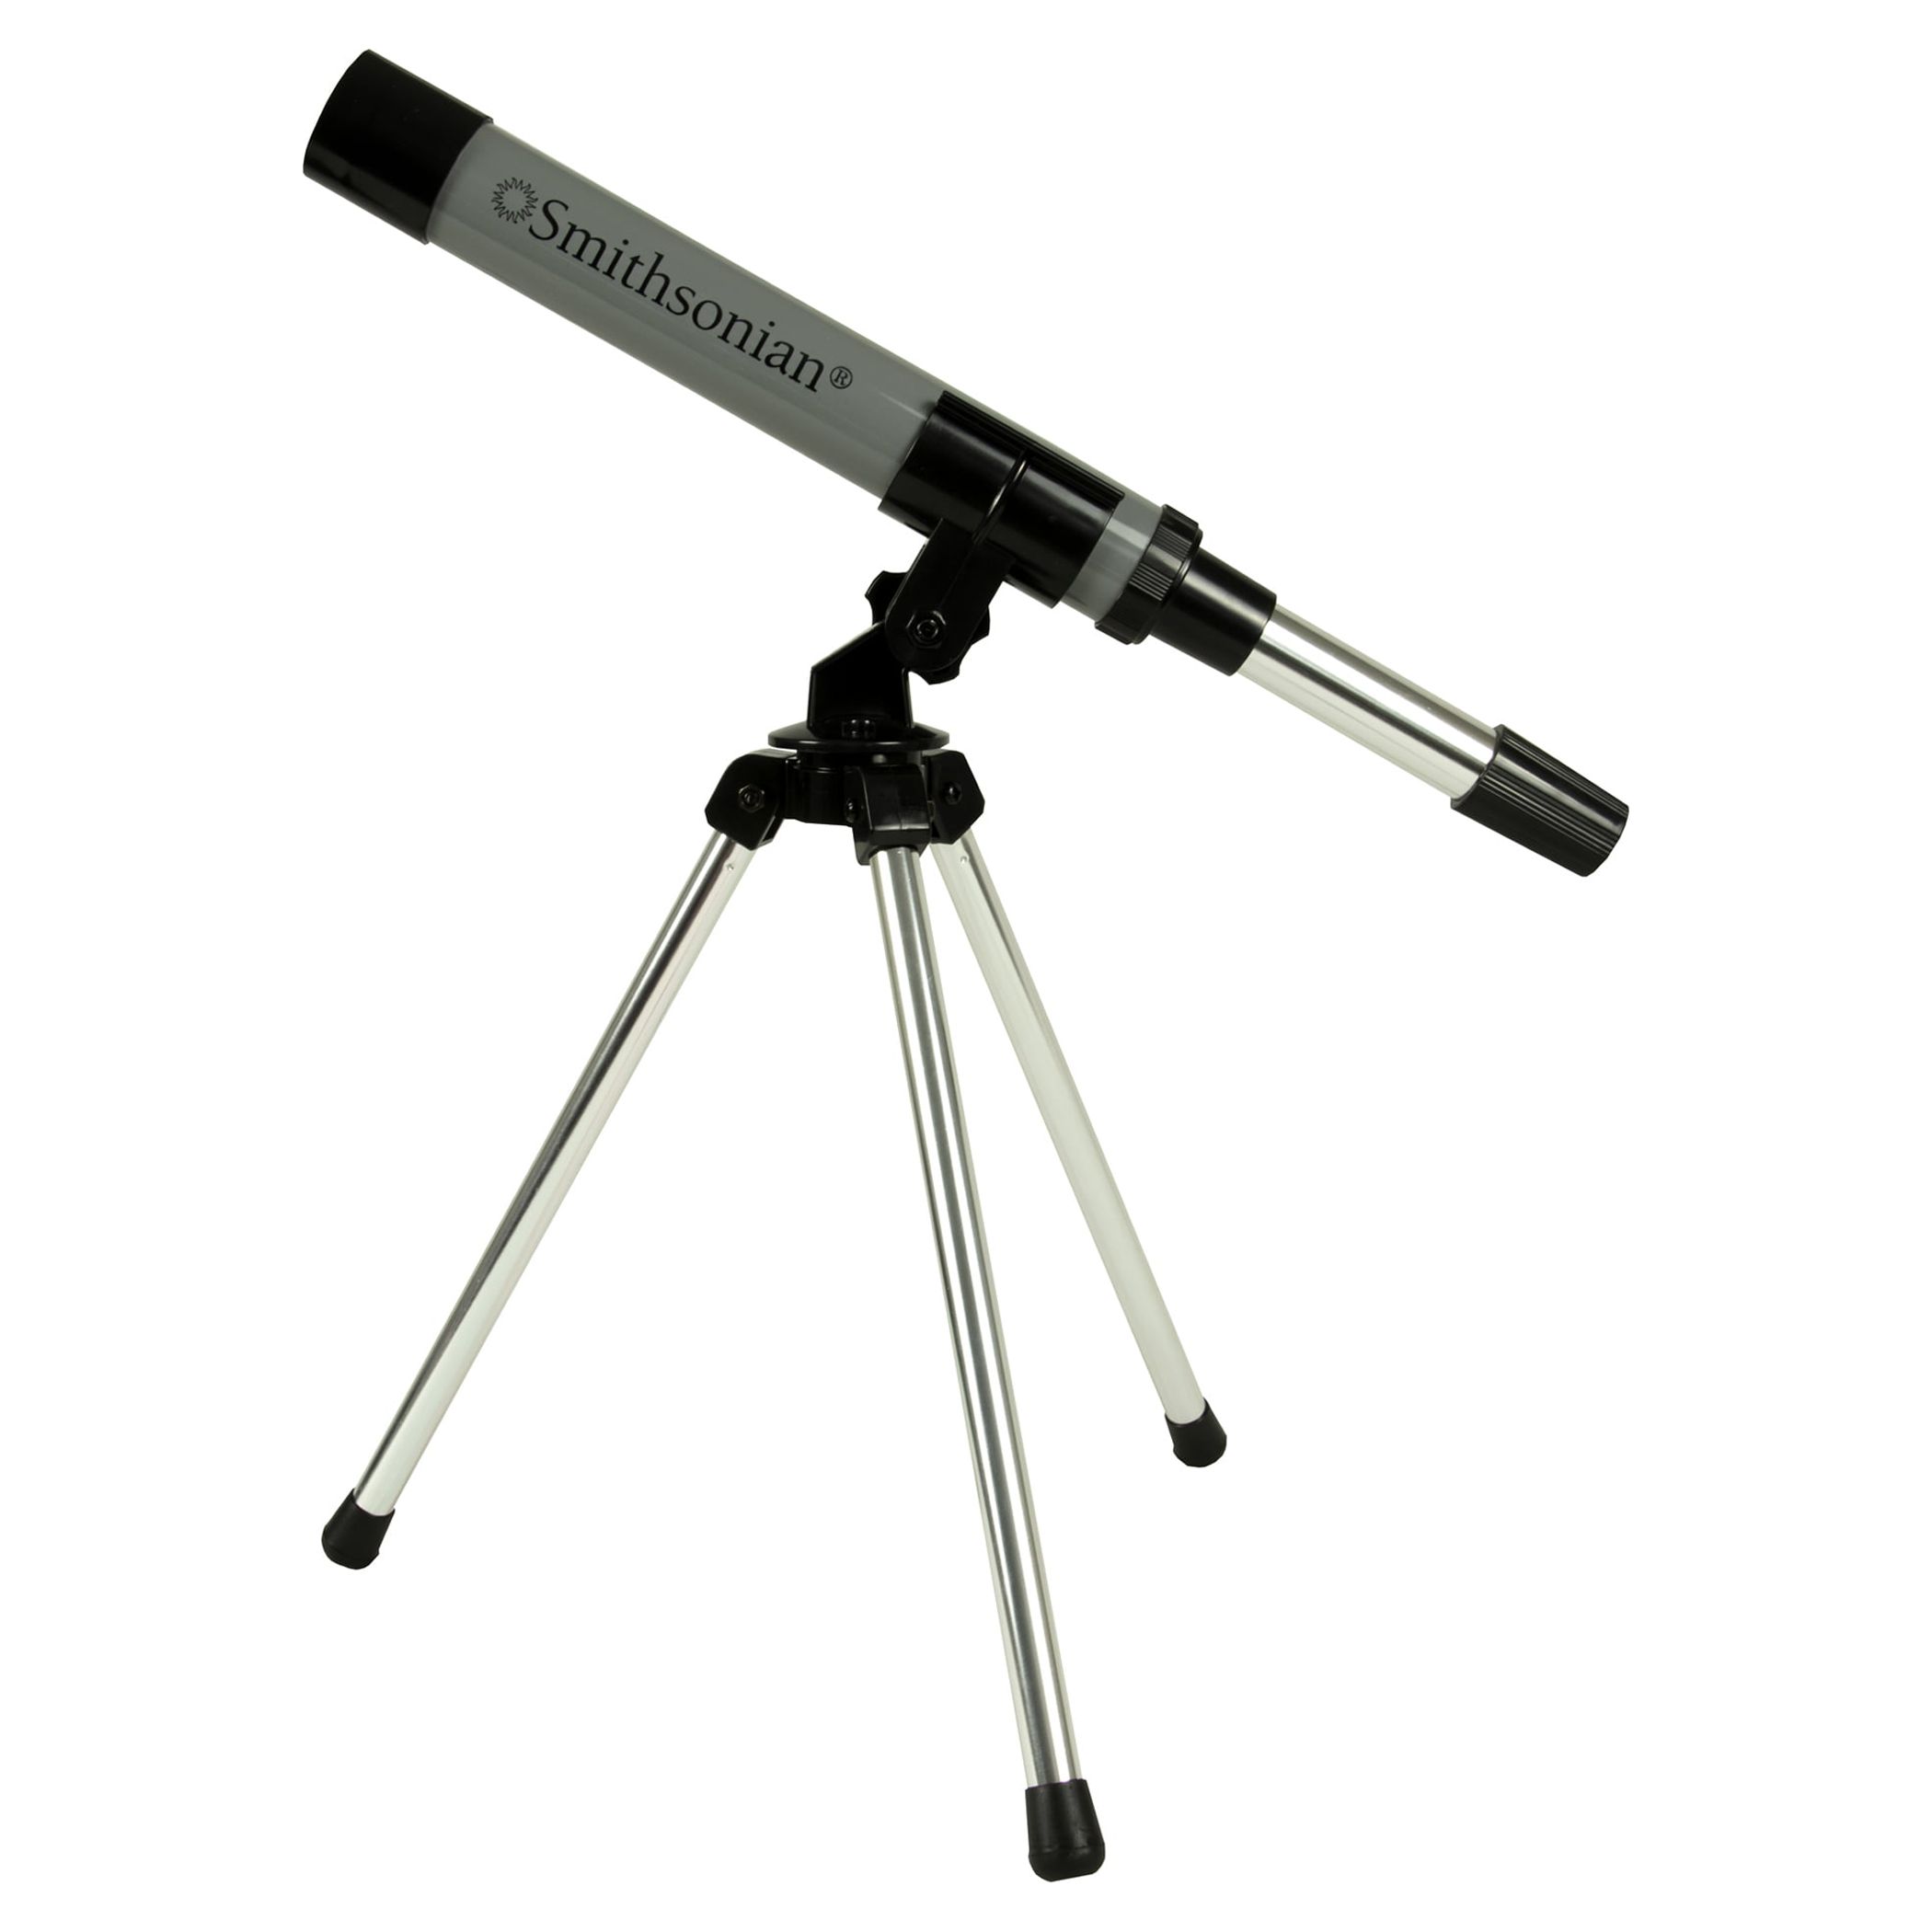 Smithsonian 30X Telescope/Monocular Kit in Black #22259- Unisex Gift for Ages 8 Years and up - image 2 of 5